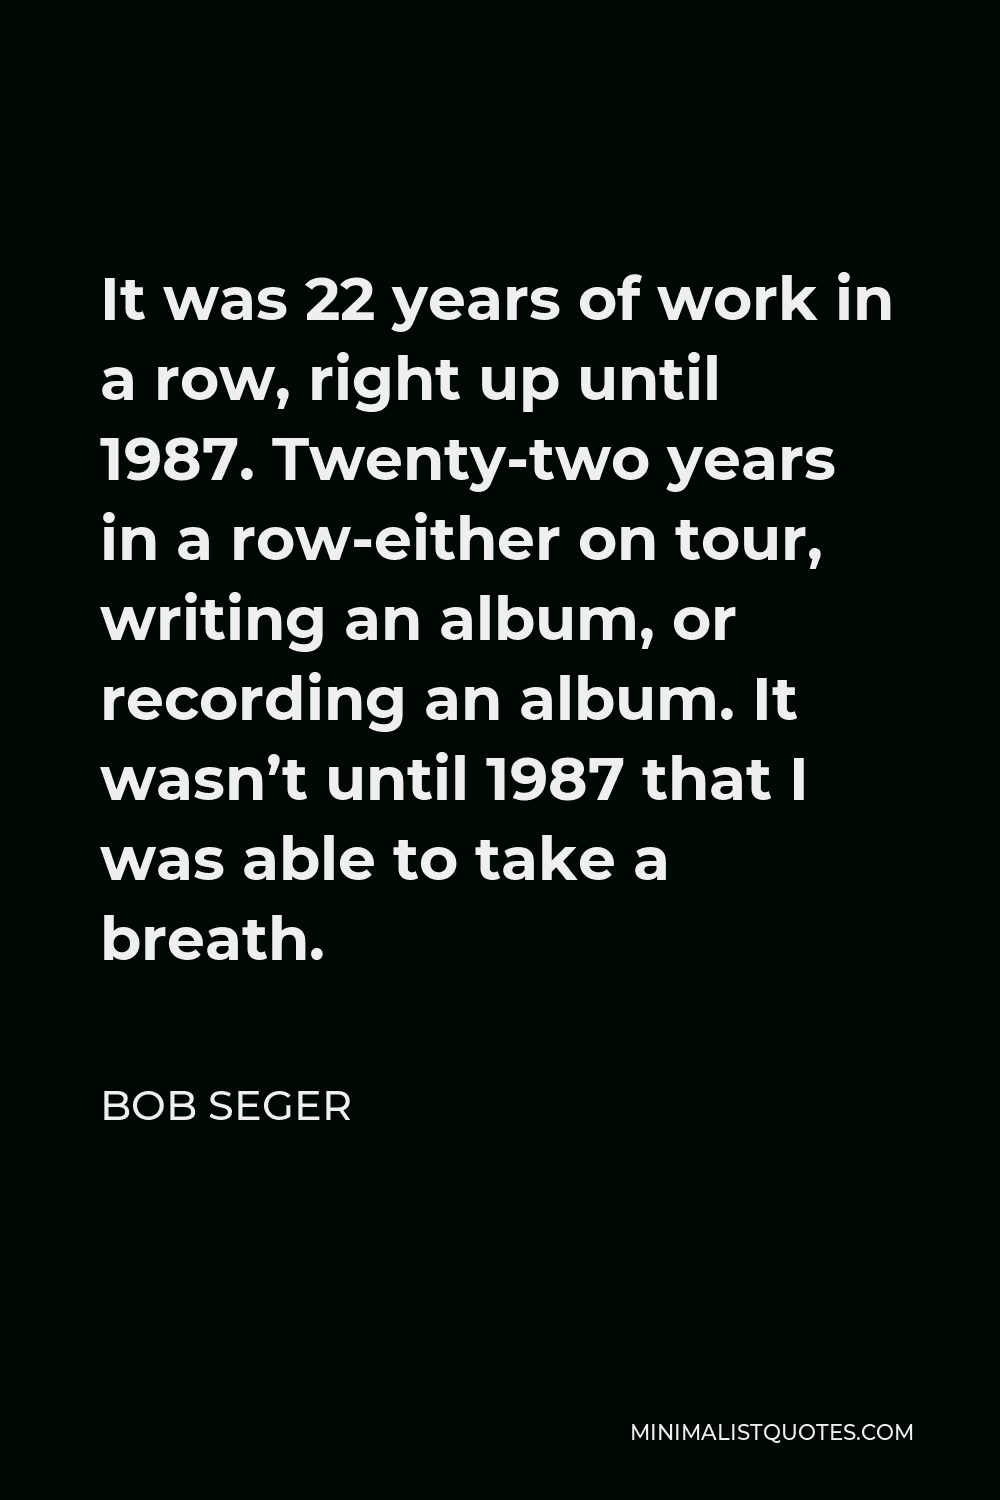 Bob Seger Quote - It was 22 years of work in a row, right up until 1987. Twenty-two years in a row-either on tour, writing an album, or recording an album. It wasn’t until 1987 that I was able to take a breath.